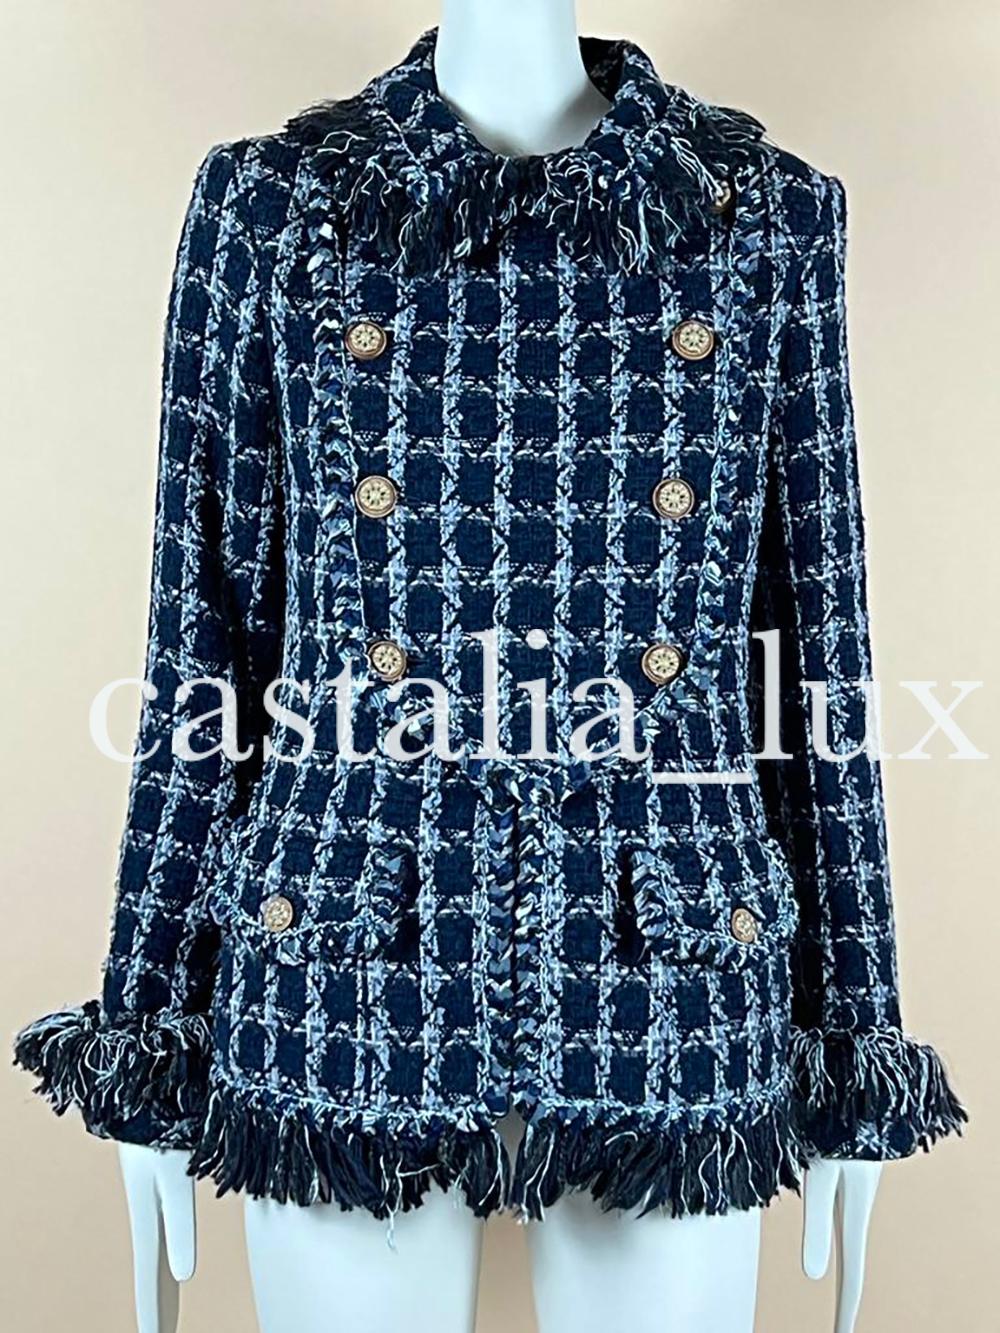 Retail price over 10,000$
Price on e-bay 6,999$ for a pre-owned item.
Rare, collectors Chanel navy tweed jacket with fringe detail from Runway of Paris / DALLAS Collection, 2014 Pre-Fall Metiers d'Art
Size mark 36 FR. Condition is pristine.
- CC zip